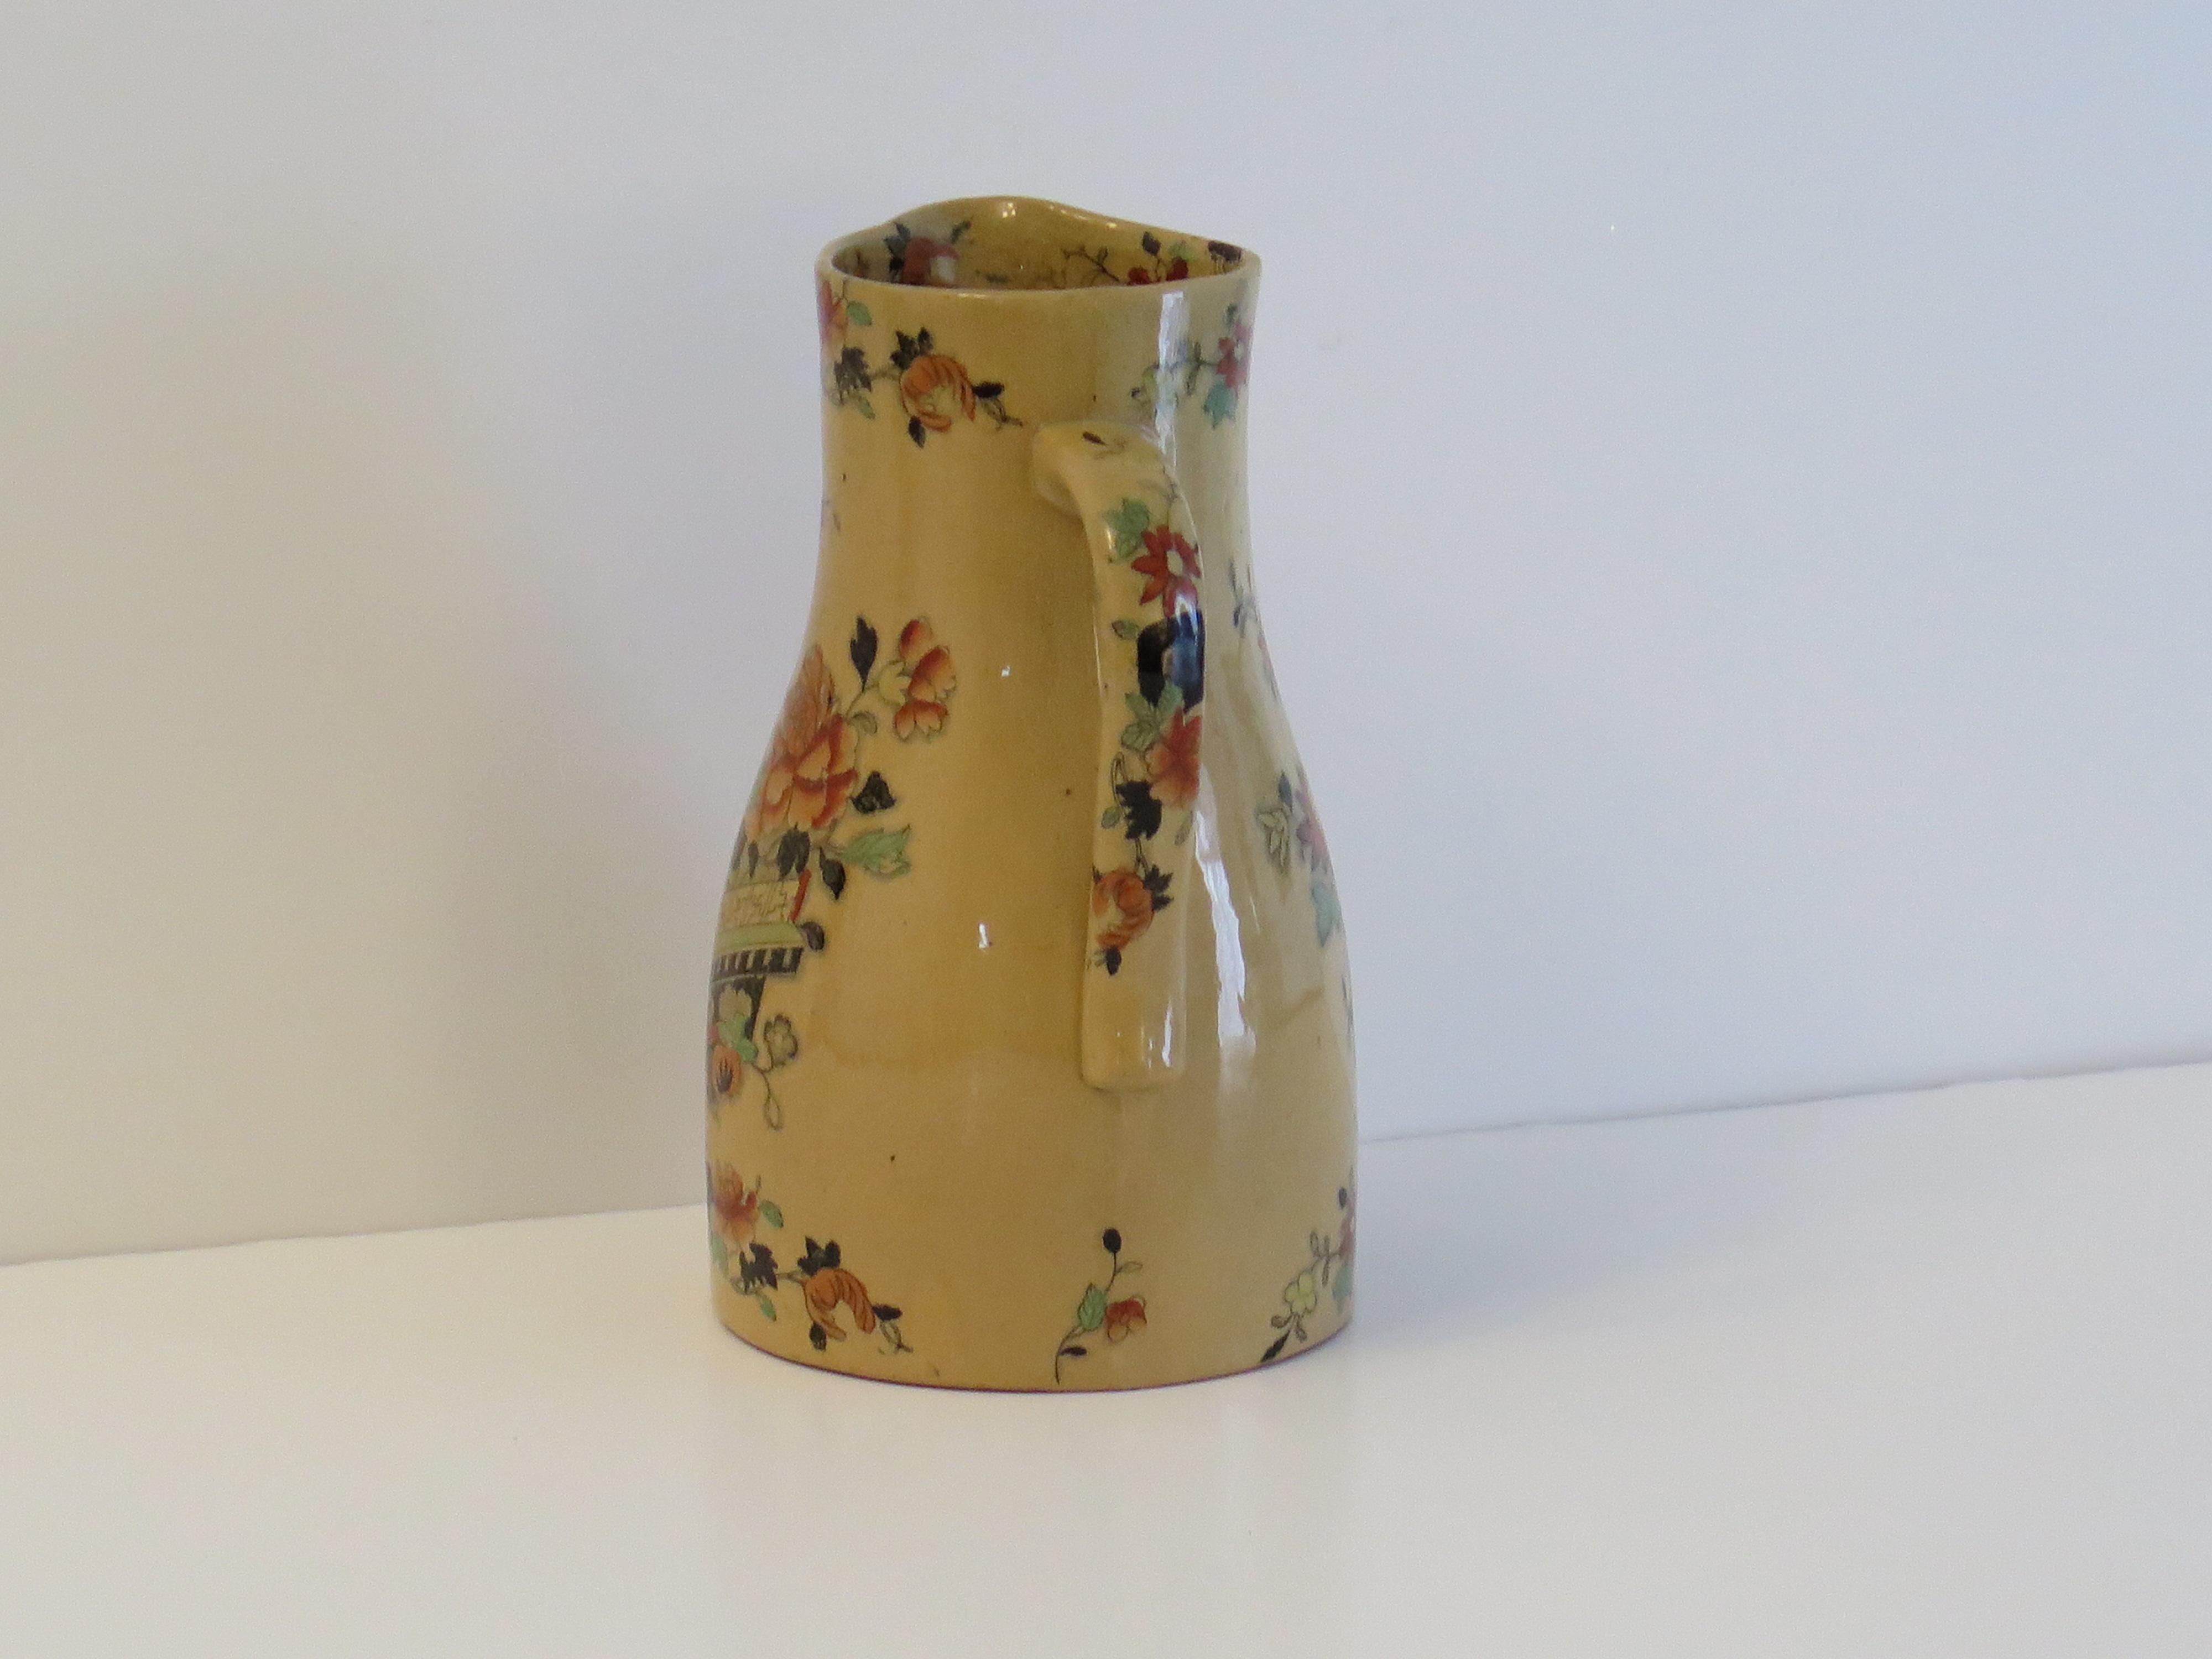 Hand-Painted Rare Mason's Ironstone Jug or Pitcher in Flower Box Pattern, Circa 1840